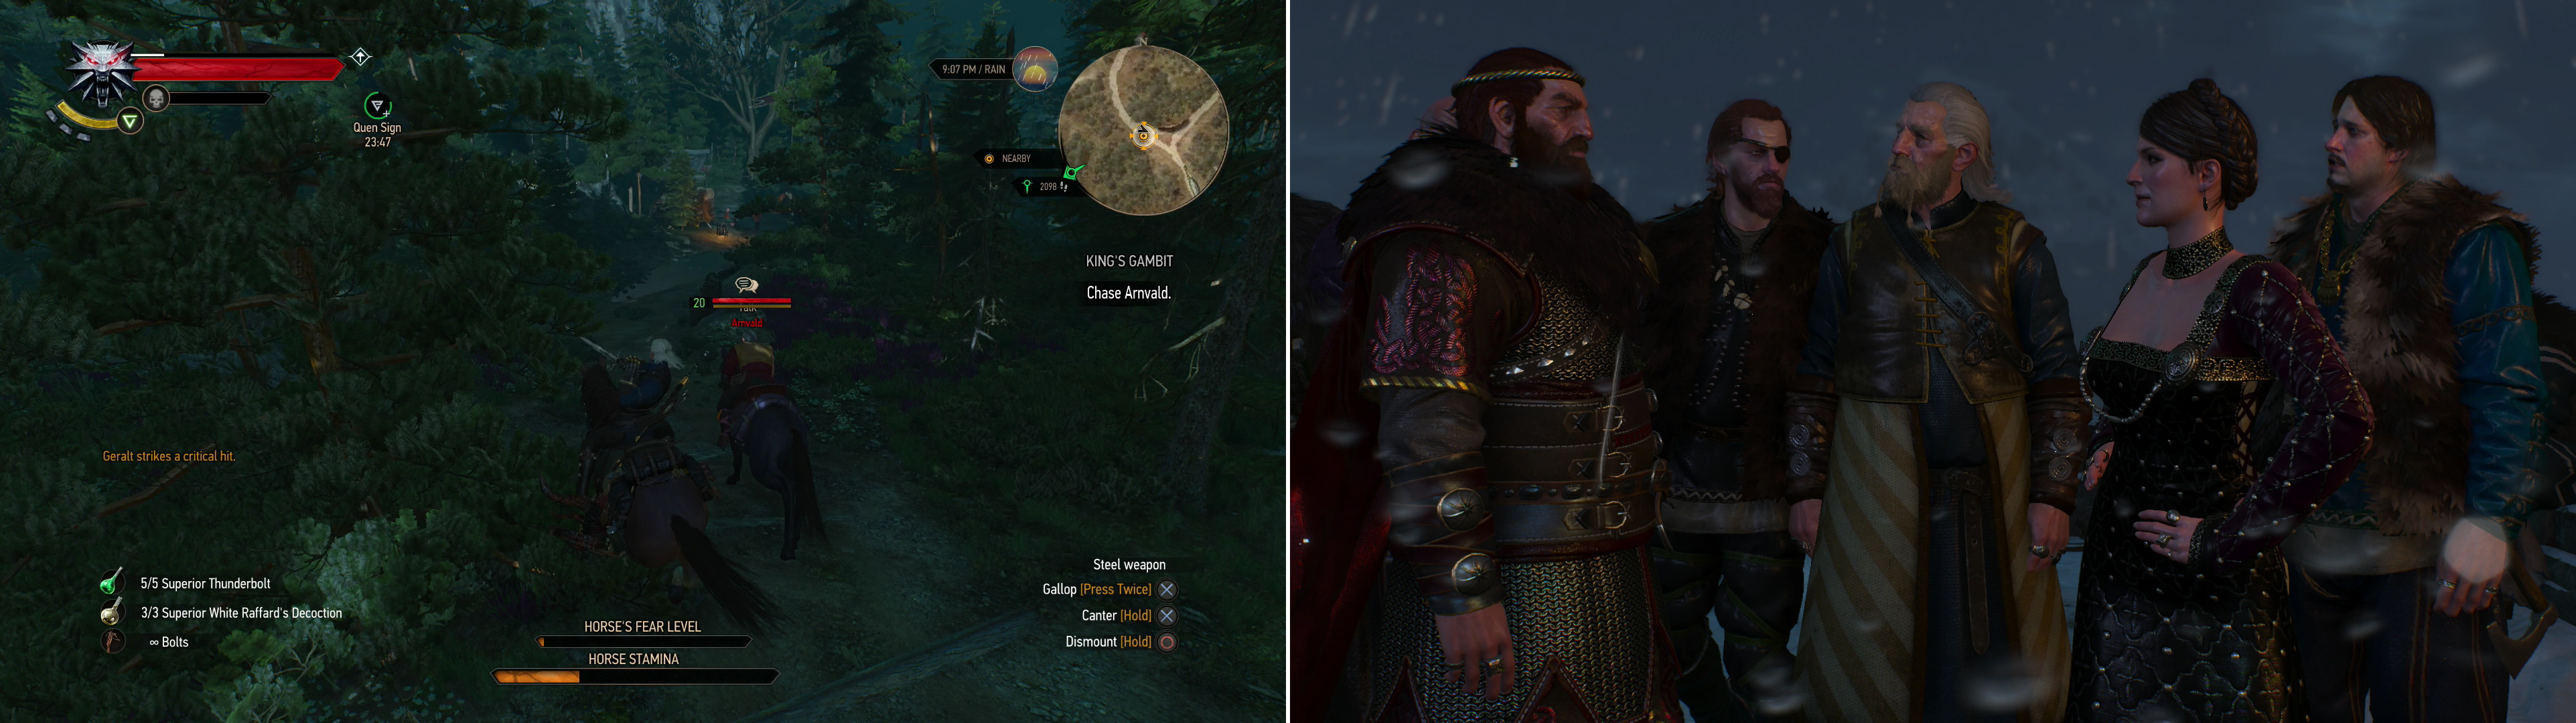 Ride down Arnvald to learn about the conspiracy (left) then make your accusation in front of the Jarls (right).